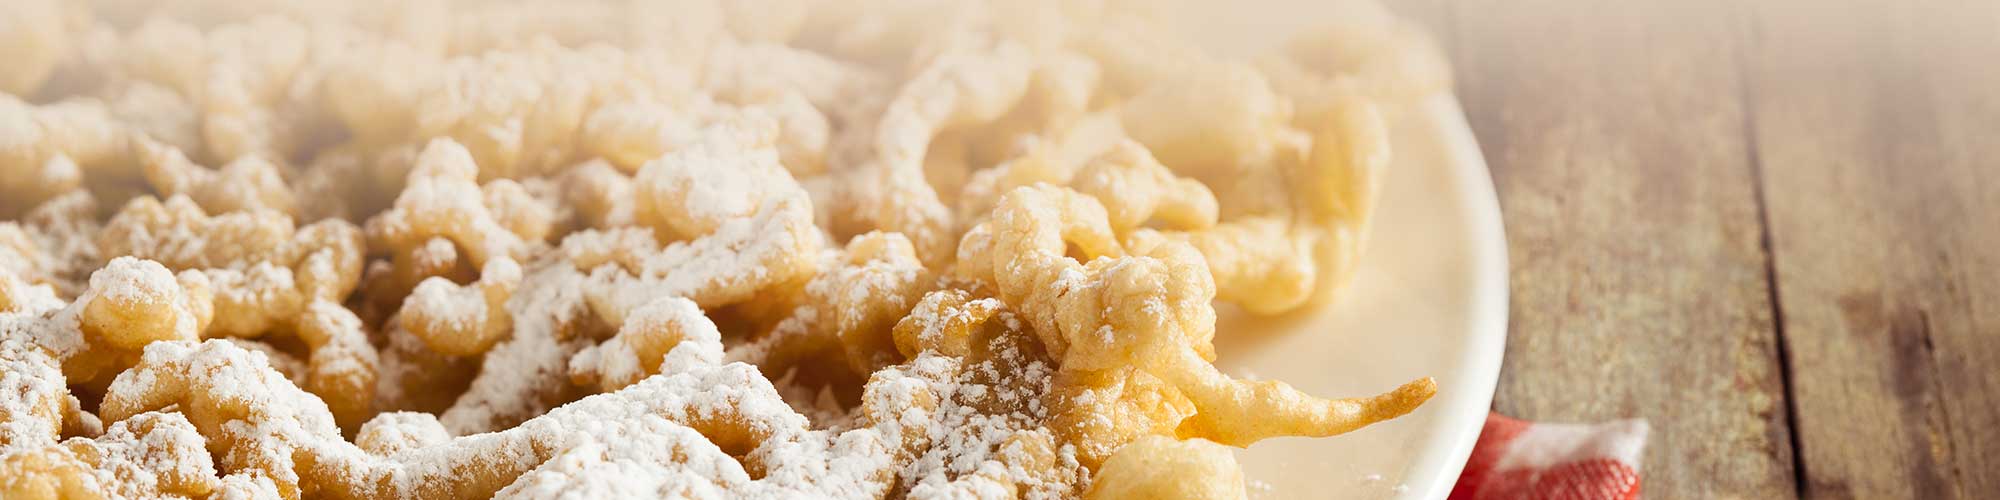 Freshly made funnel cakes, decadent kettle corn, and more at Richardsons!